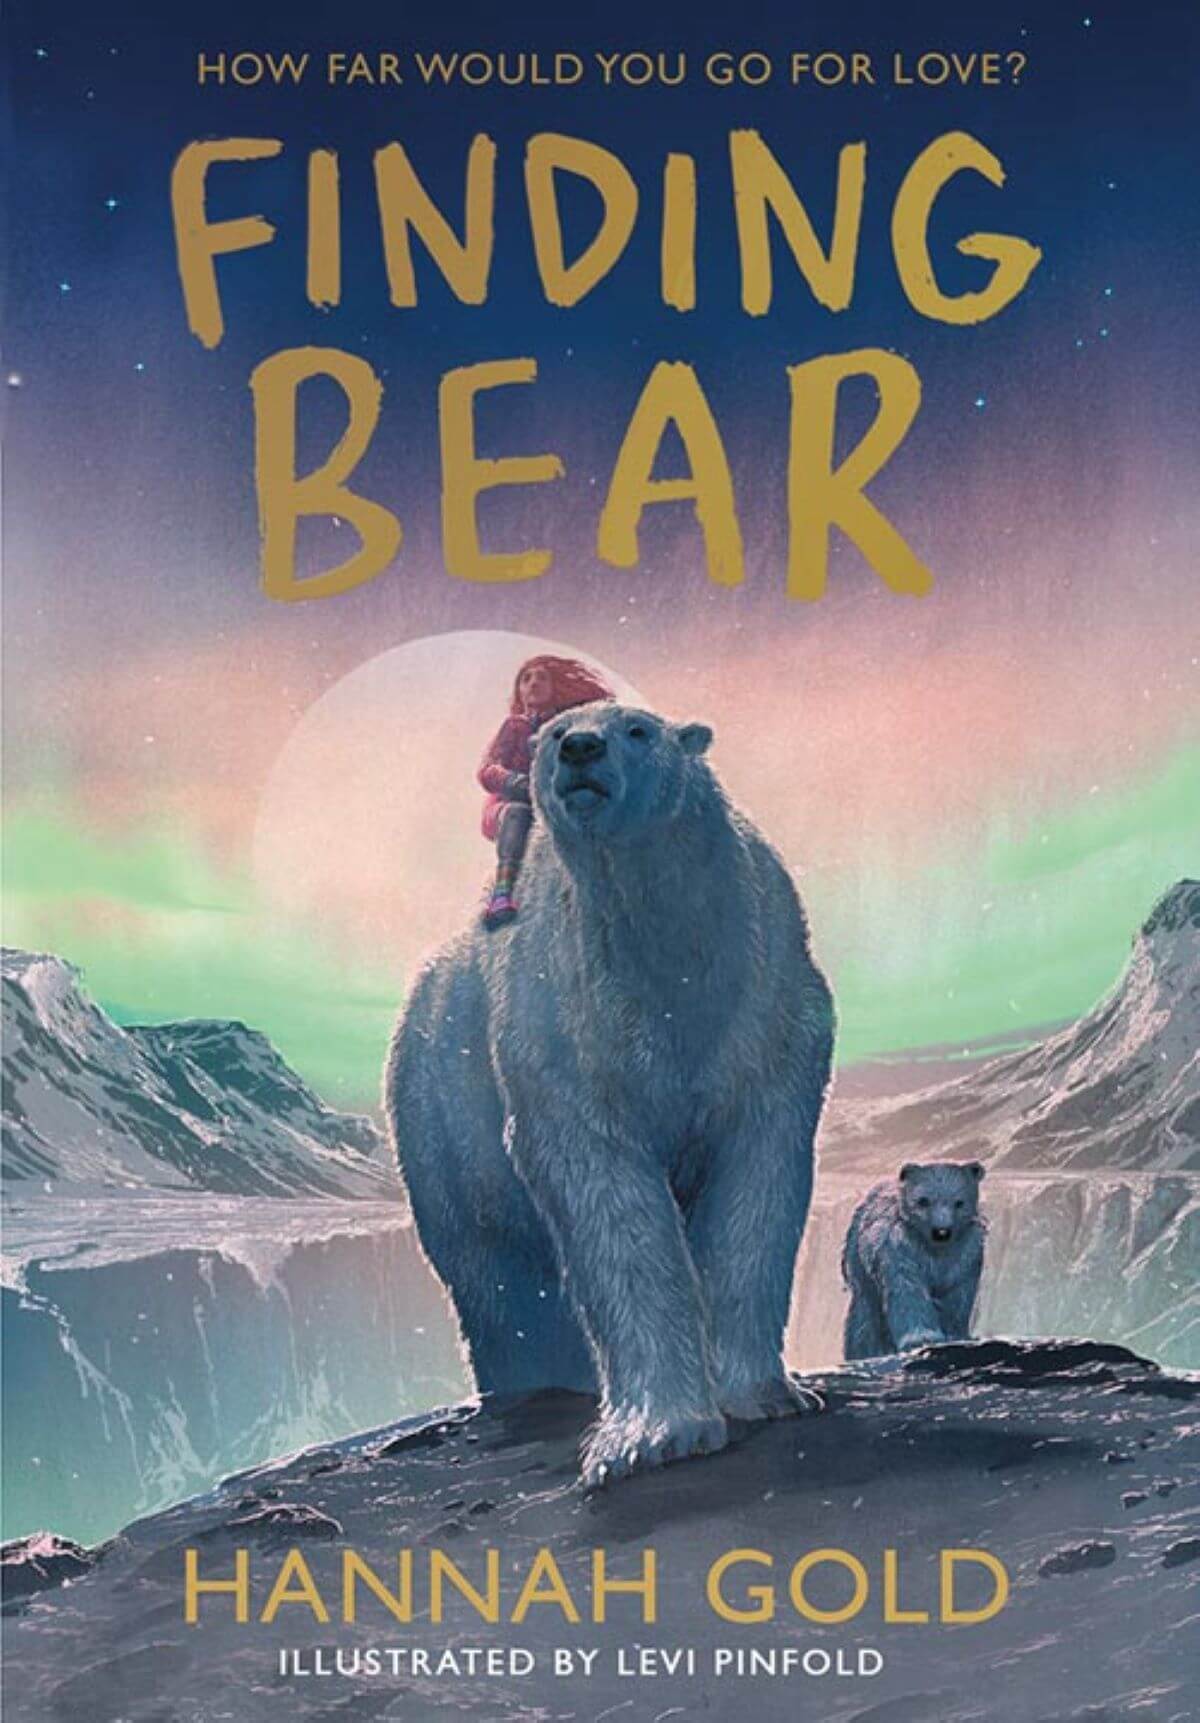 An illustrated children's book cover of a bear carrying a child with the icy northern lights as a backdrop